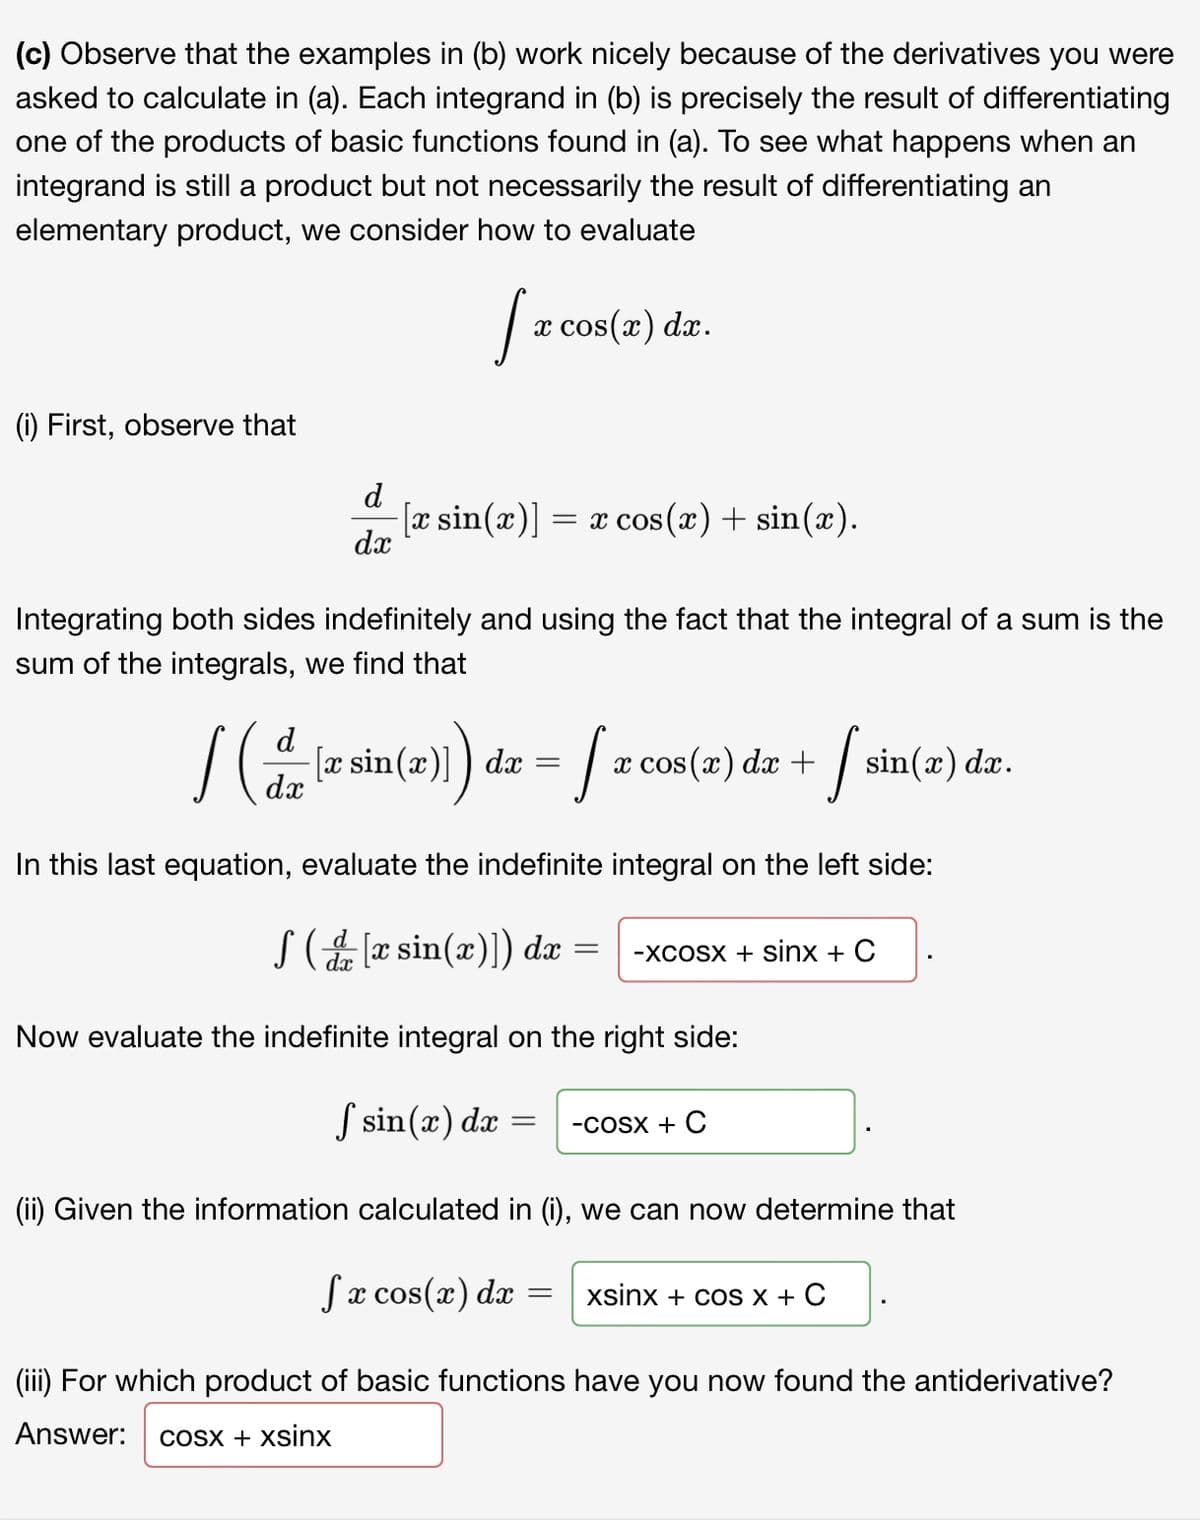 (c) Observe that the examples in (b) work nicely because of the derivatives you were
asked to calculate in (a). Each integrand in (b) is precisely the result of differentiating
one of the products of basic functions found in (a). To see what happens when an
integrand is still a product but not necessarily the result of differentiating an
elementary product, we consider how to evaluate
x cos(x) dx.
(1) First, observe that
d
[x sin(x)] = x cos (x) + sin(x).
dx
COS
Integrating both sides indefinitely and using the fact that the integral of a sum is the
sum of the integrals, we find that
d
sin(x)]
dx
dx
х cos(x) da +
sin(x) dx.
In this last equation, evaluate the indefinite integral on the left side:
S (æ sin(x)]) dæ =
-XCOSX + Sinx + C
Now evaluate the indefinite integral on the right side:
S sin(x) dæ
-COSX + C
(ii) Given the information calculated in (i), we can now determine that
Sx cos(x) dx
xsinx + coS X + C
(iii) For which product of basic functions have you now found the antiderivative?
Answer:
COSX + xsinx
